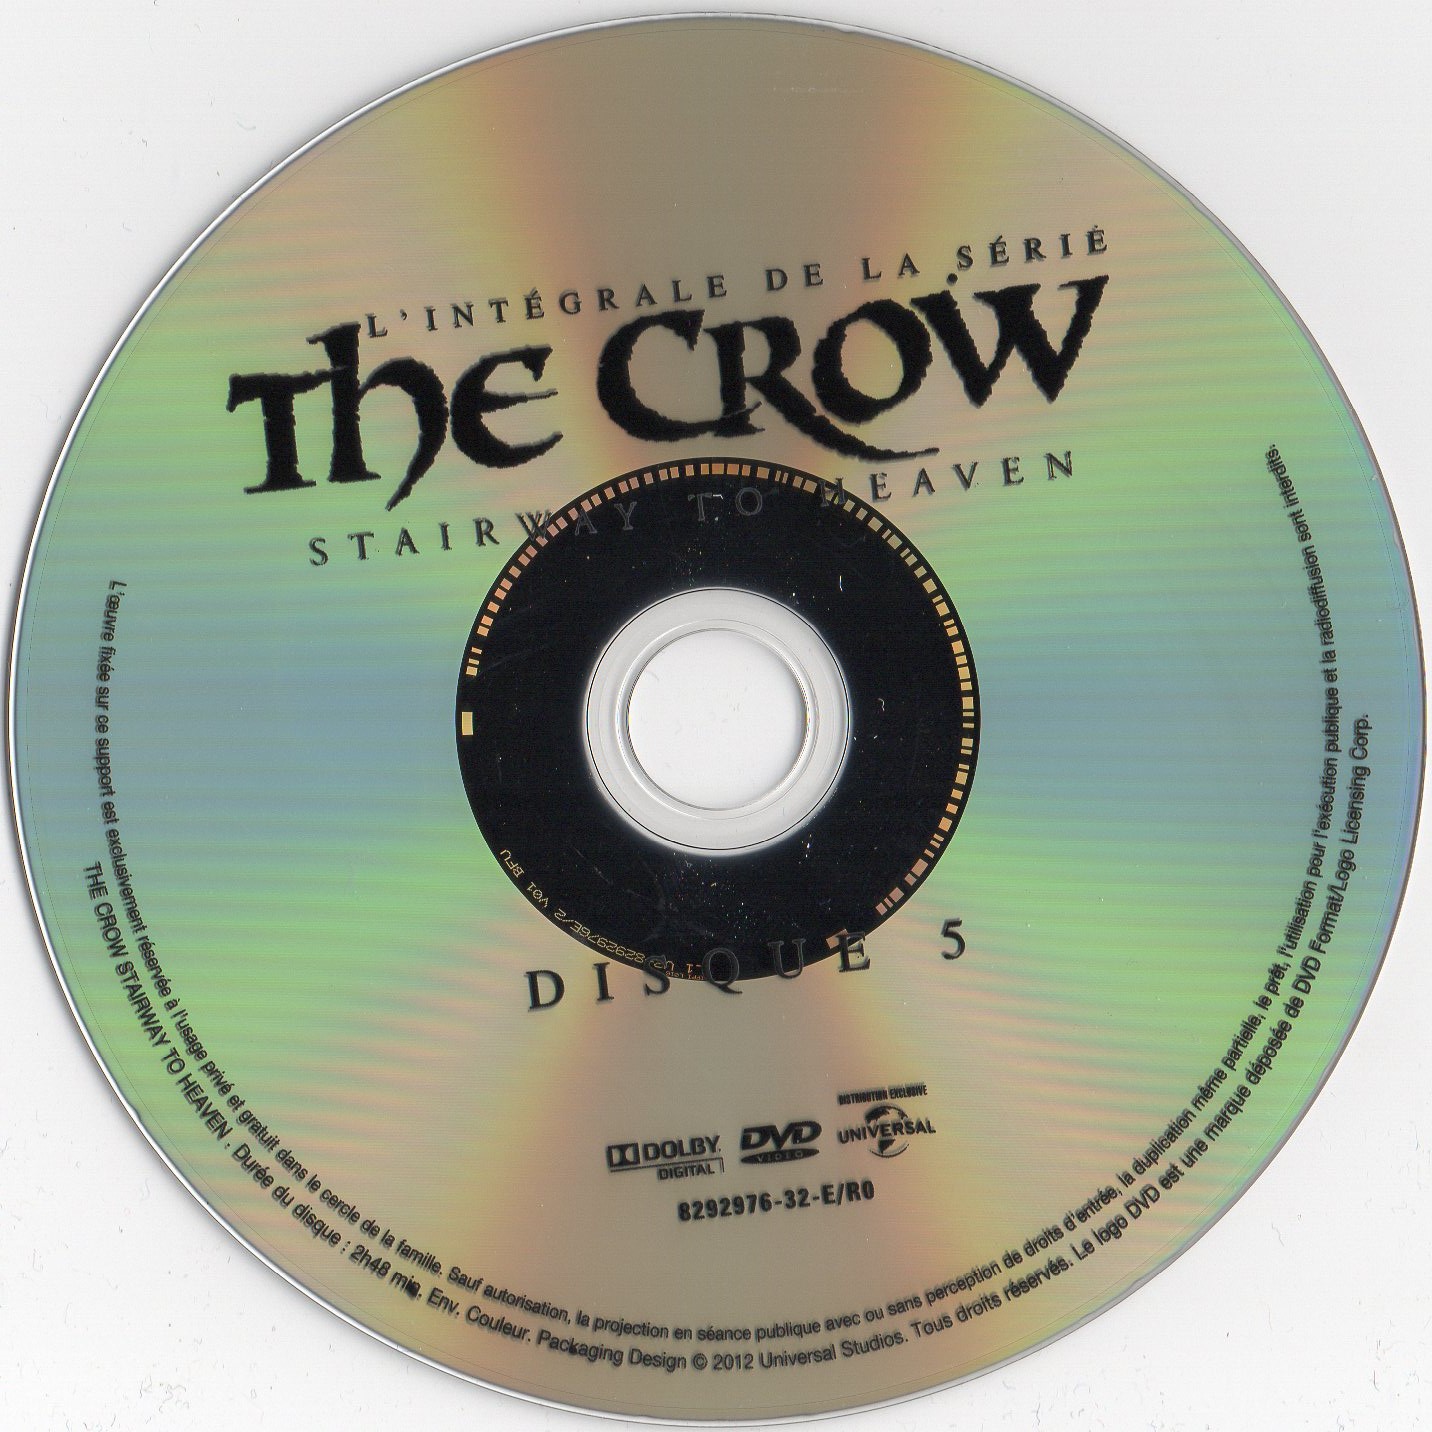 The crow stairway to heaven DISC 5